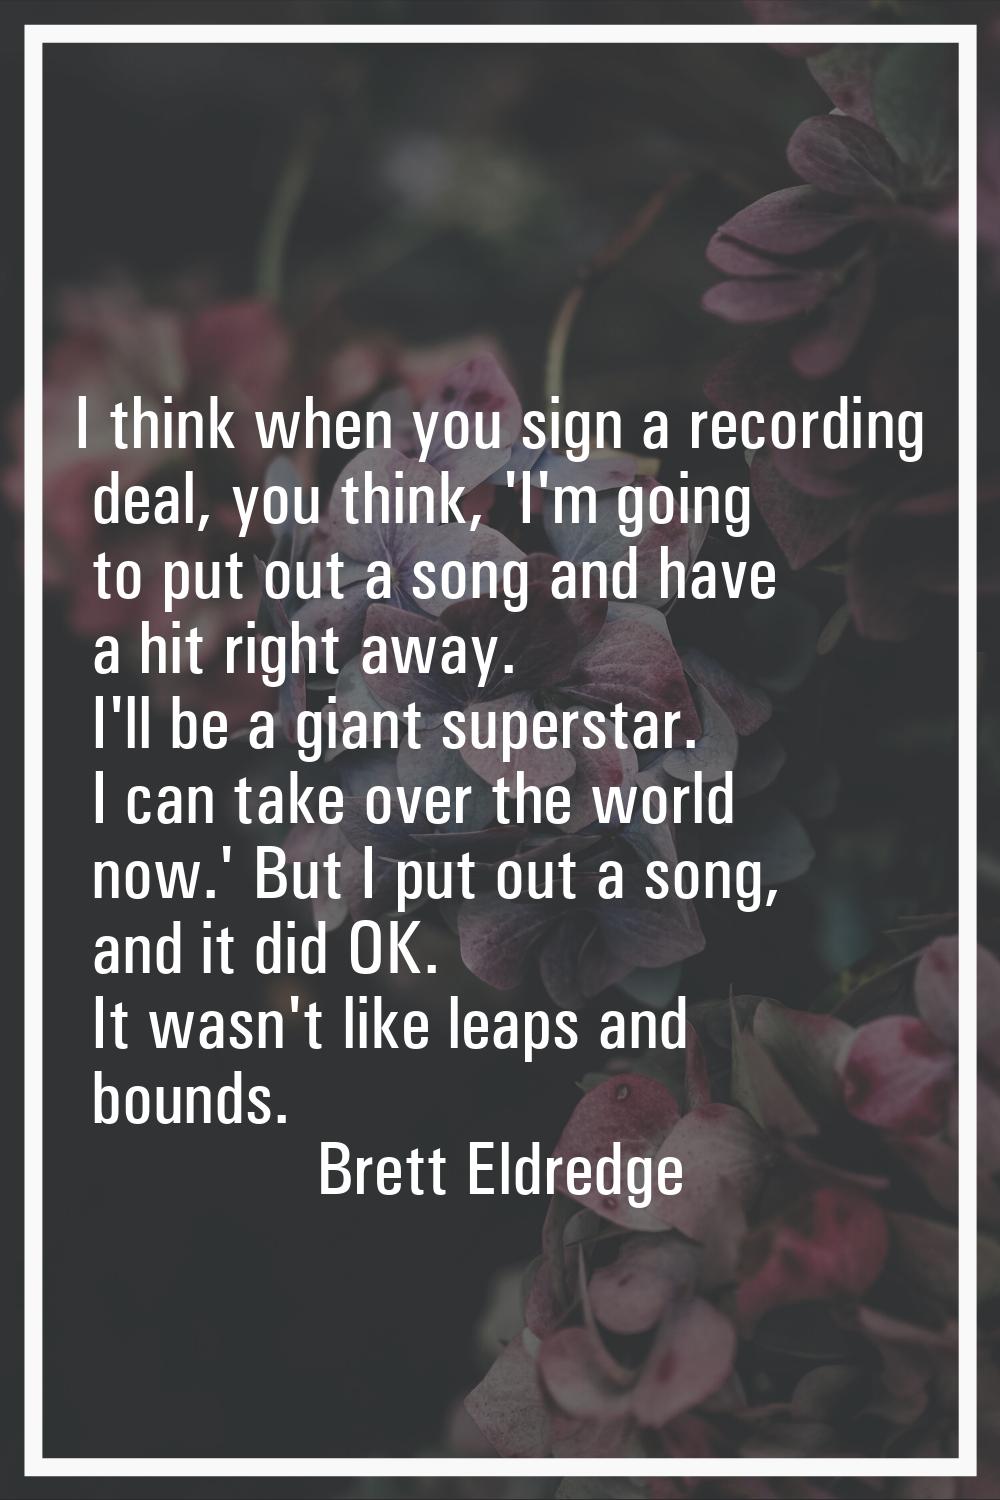 I think when you sign a recording deal, you think, 'I'm going to put out a song and have a hit righ